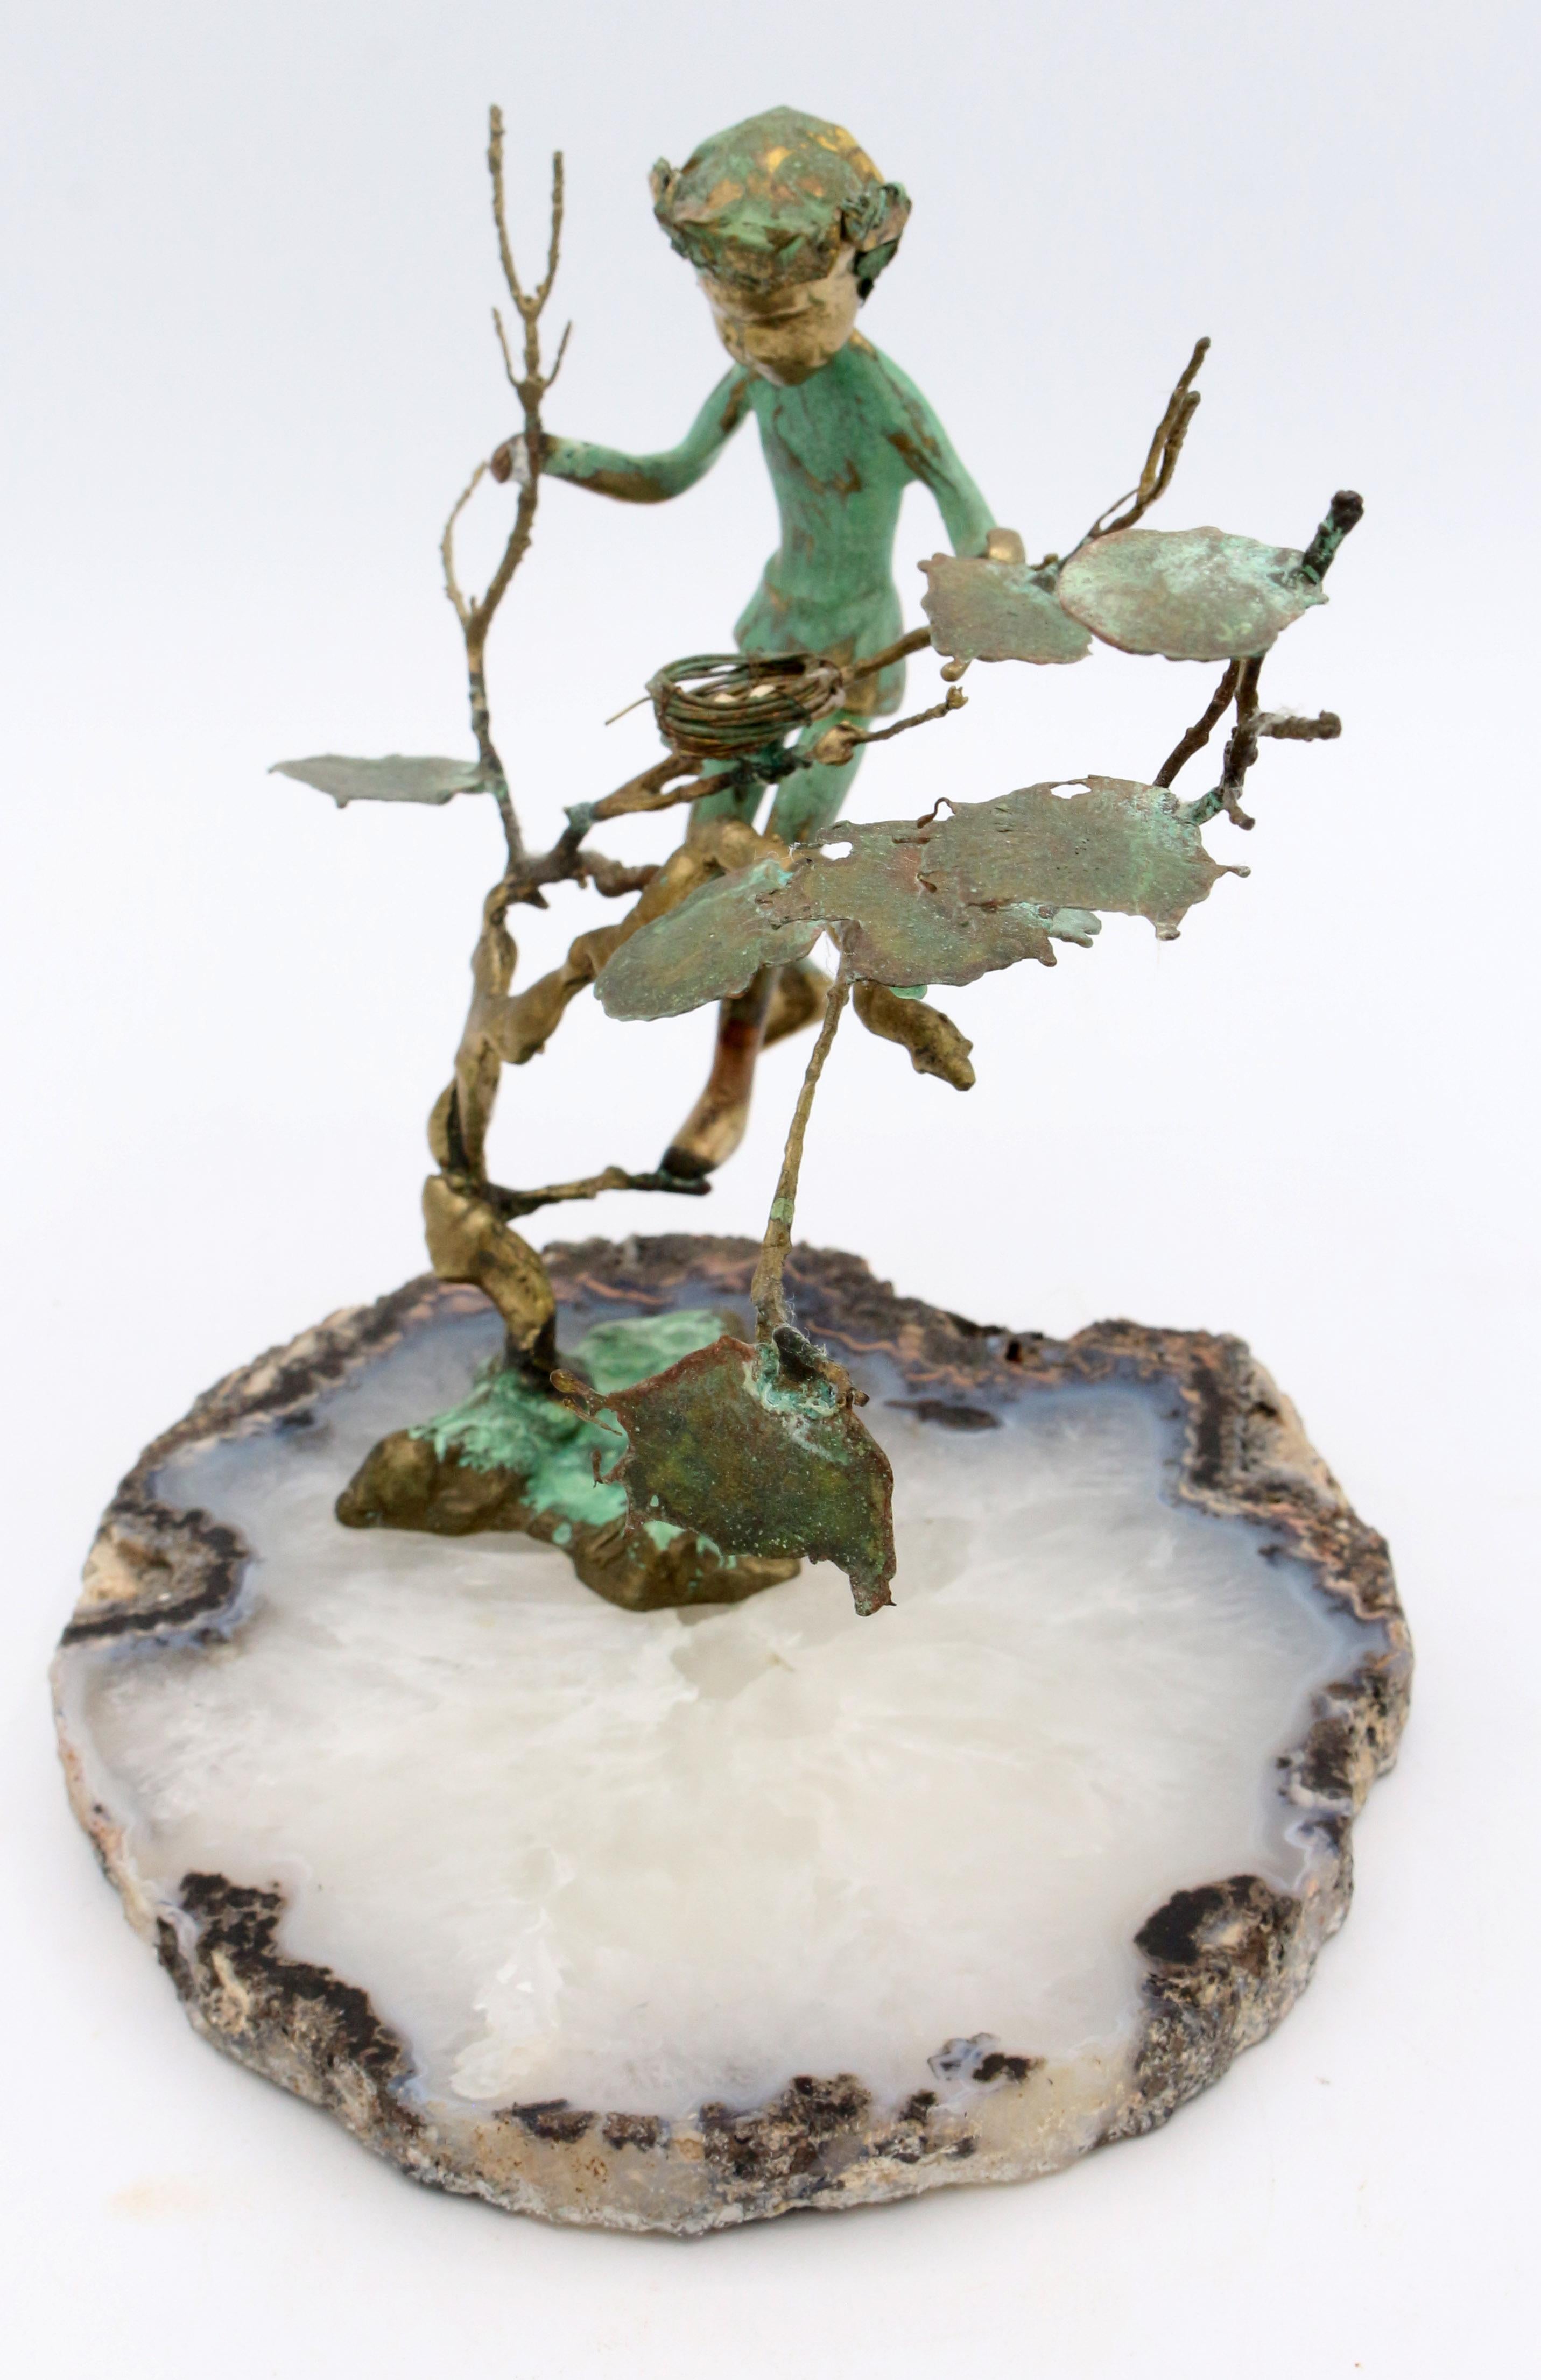 Circa 1970s bronze sculpture by Malcolm Moran, Carmel, CA. Verdigris patinated bronze on natural geode base. Copyright stamp. A boy climbing a tree, looking at a bird's nest with 3 eggs.
6.5